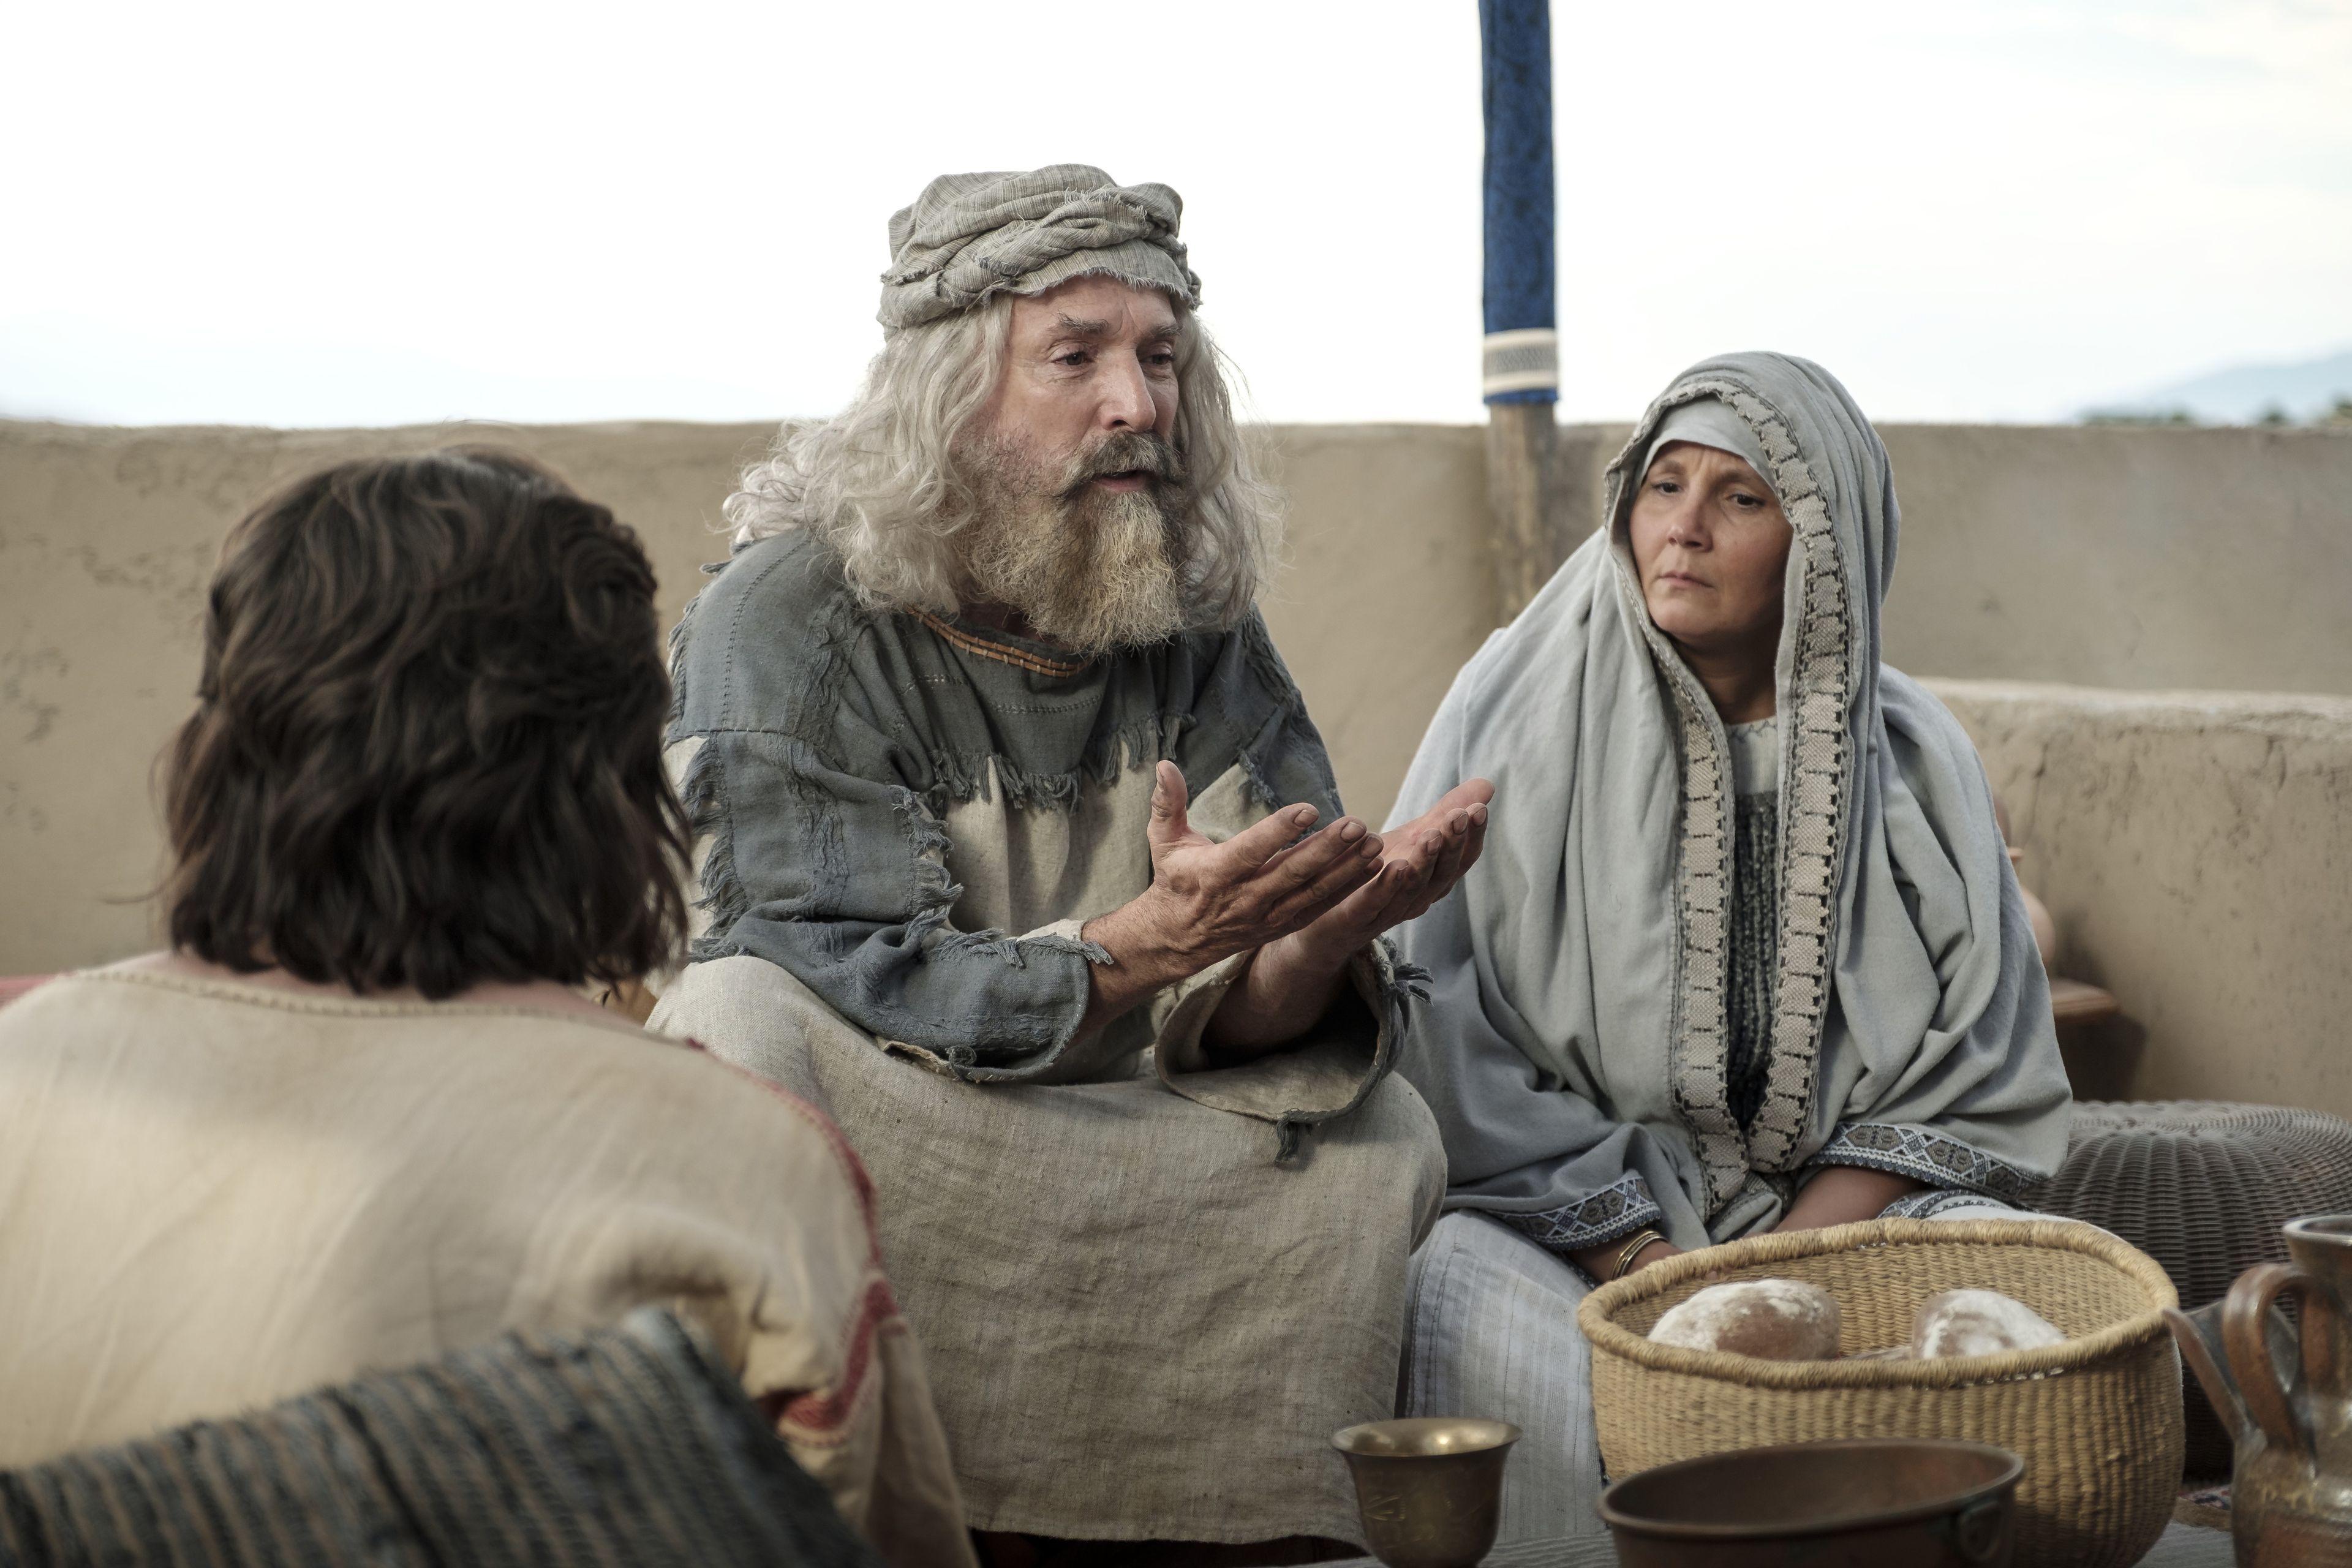 Lehi teaches his family at their home at Jerusalem.